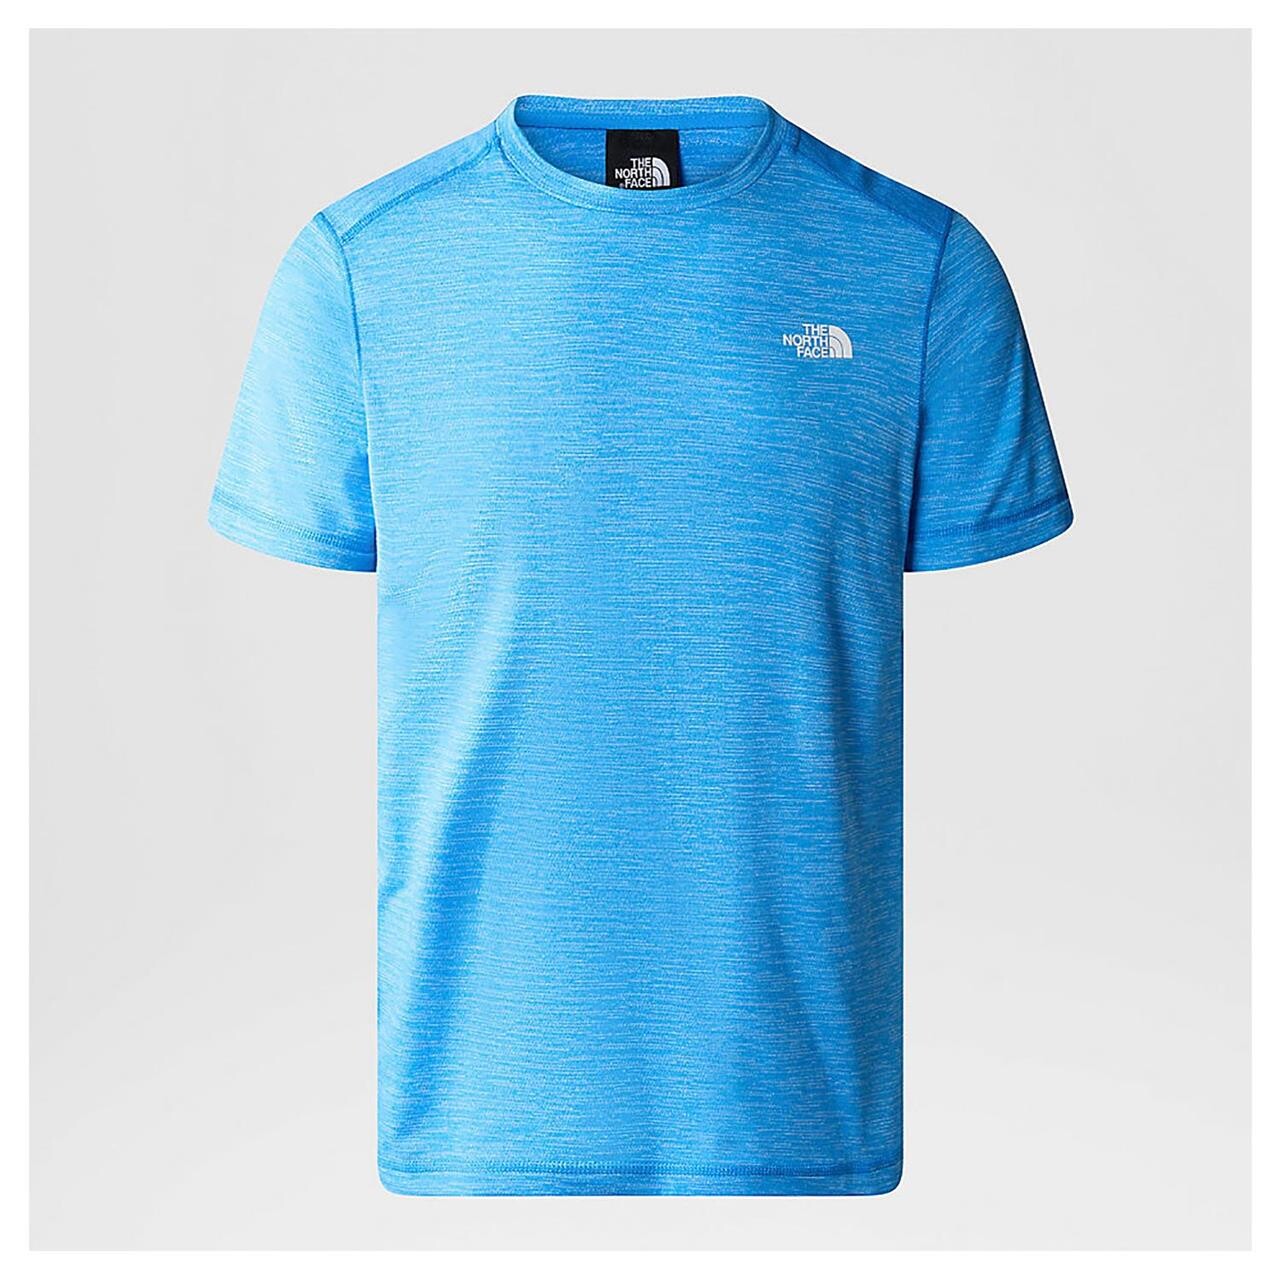 https://caminoking.dk/wp-content/uploads/2023/03/The-North-Face-Mens-Lightning-SS-Tee-BLUE-SUPER-SONIC-BLUE-WHITE-HEATHER-Small-S.jpg